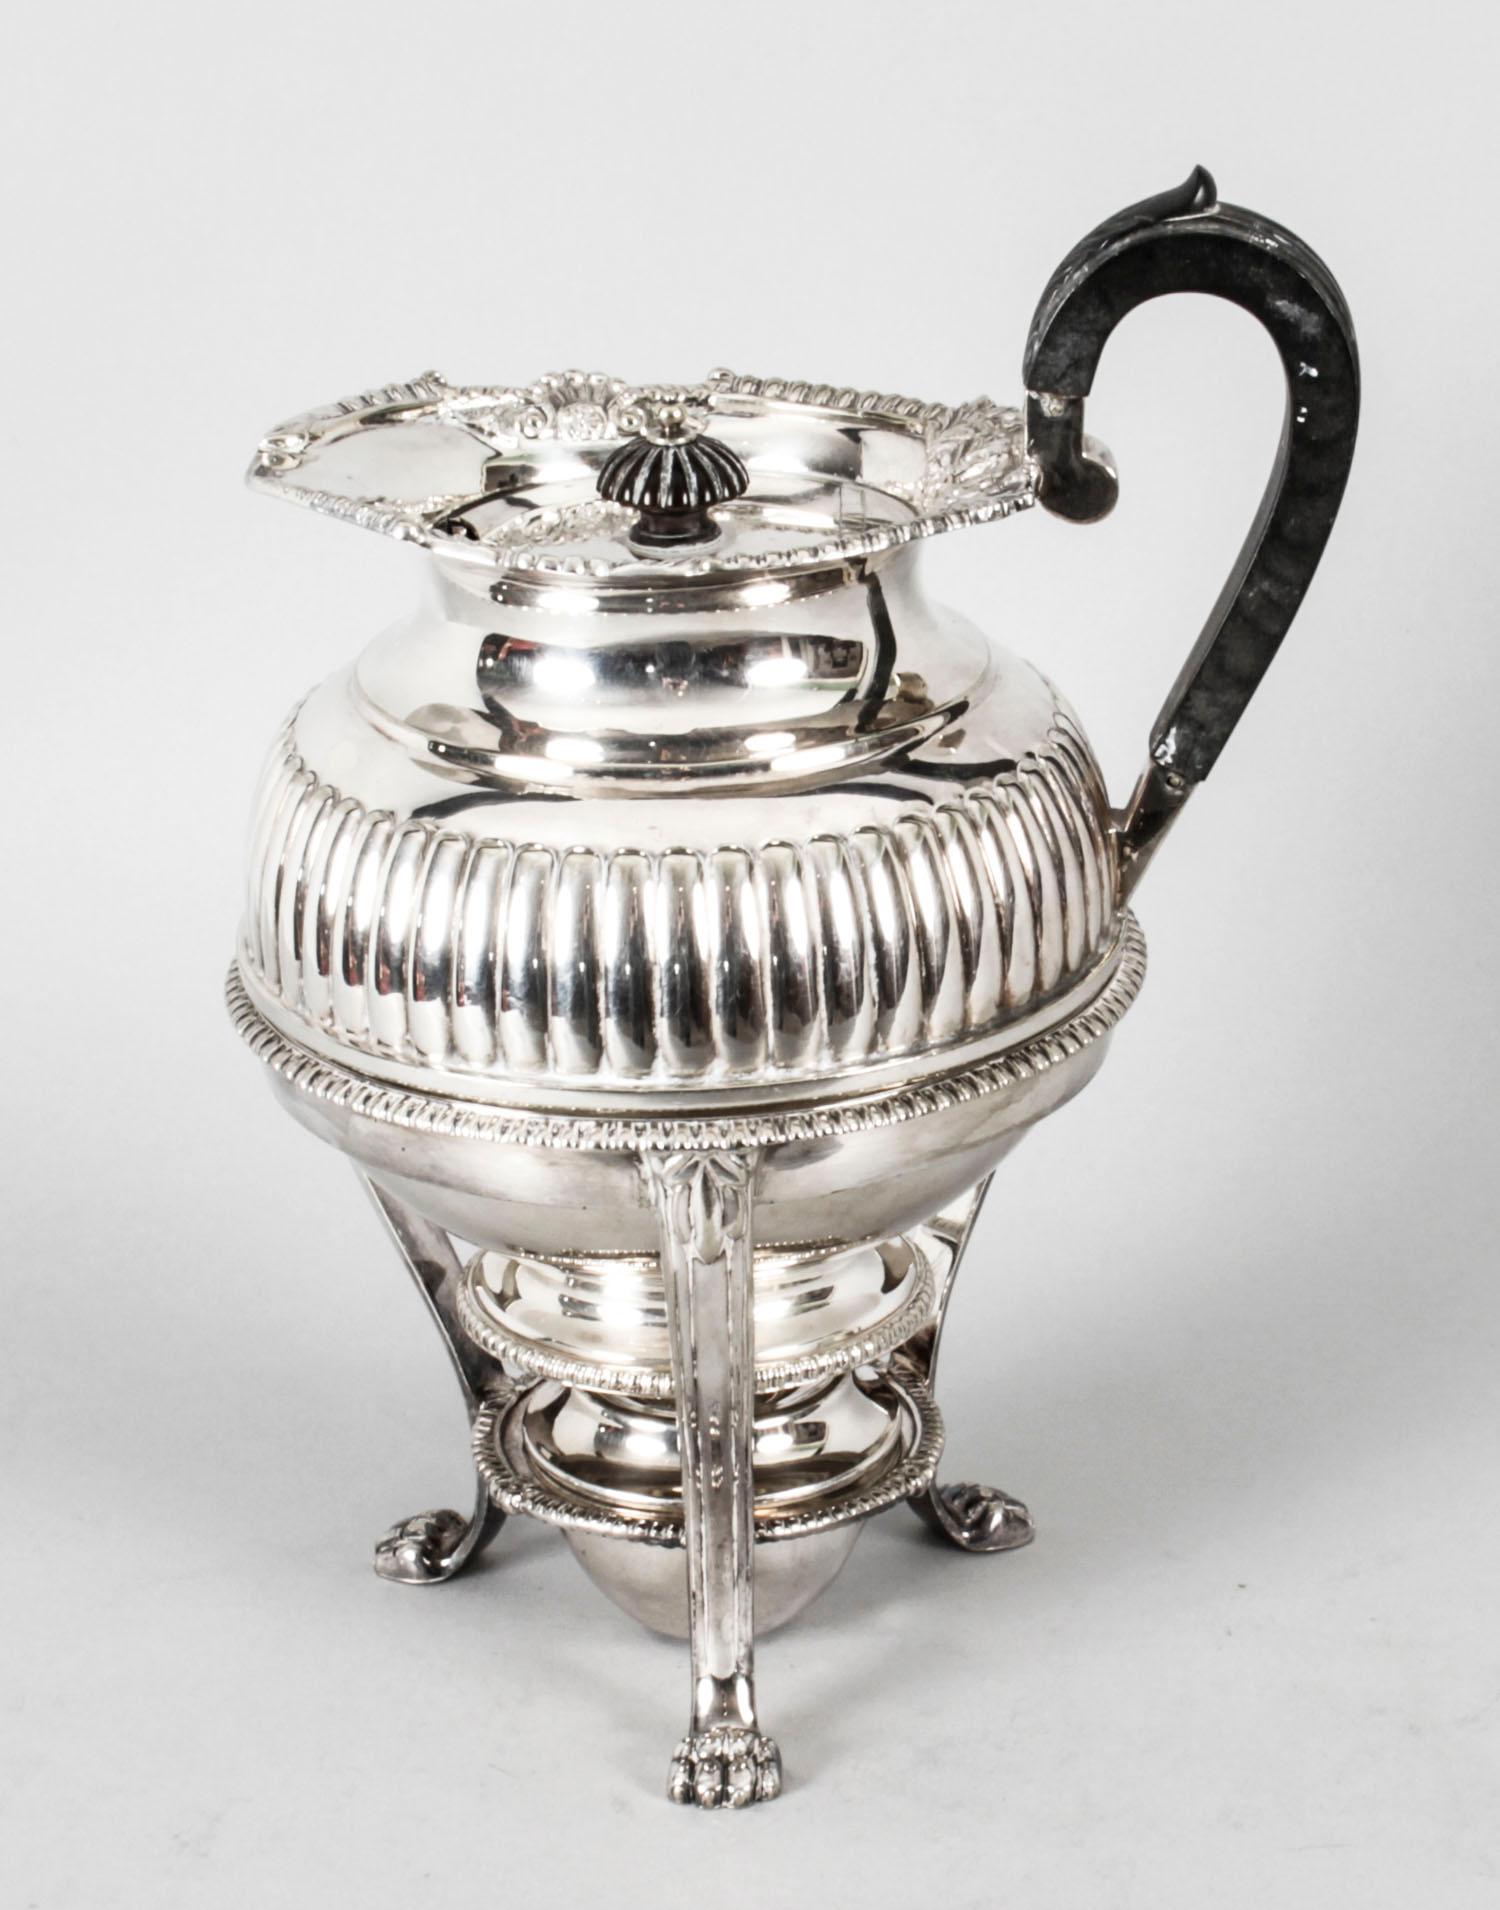 This is a stylish English antique silver plated Coffee biggin on Stand by the renowned silversmith Elkington & Co, circa 1860 in date.

This superb kettle has a circular shaped body with an elegant handle and gadrooned decoration.
 
It has